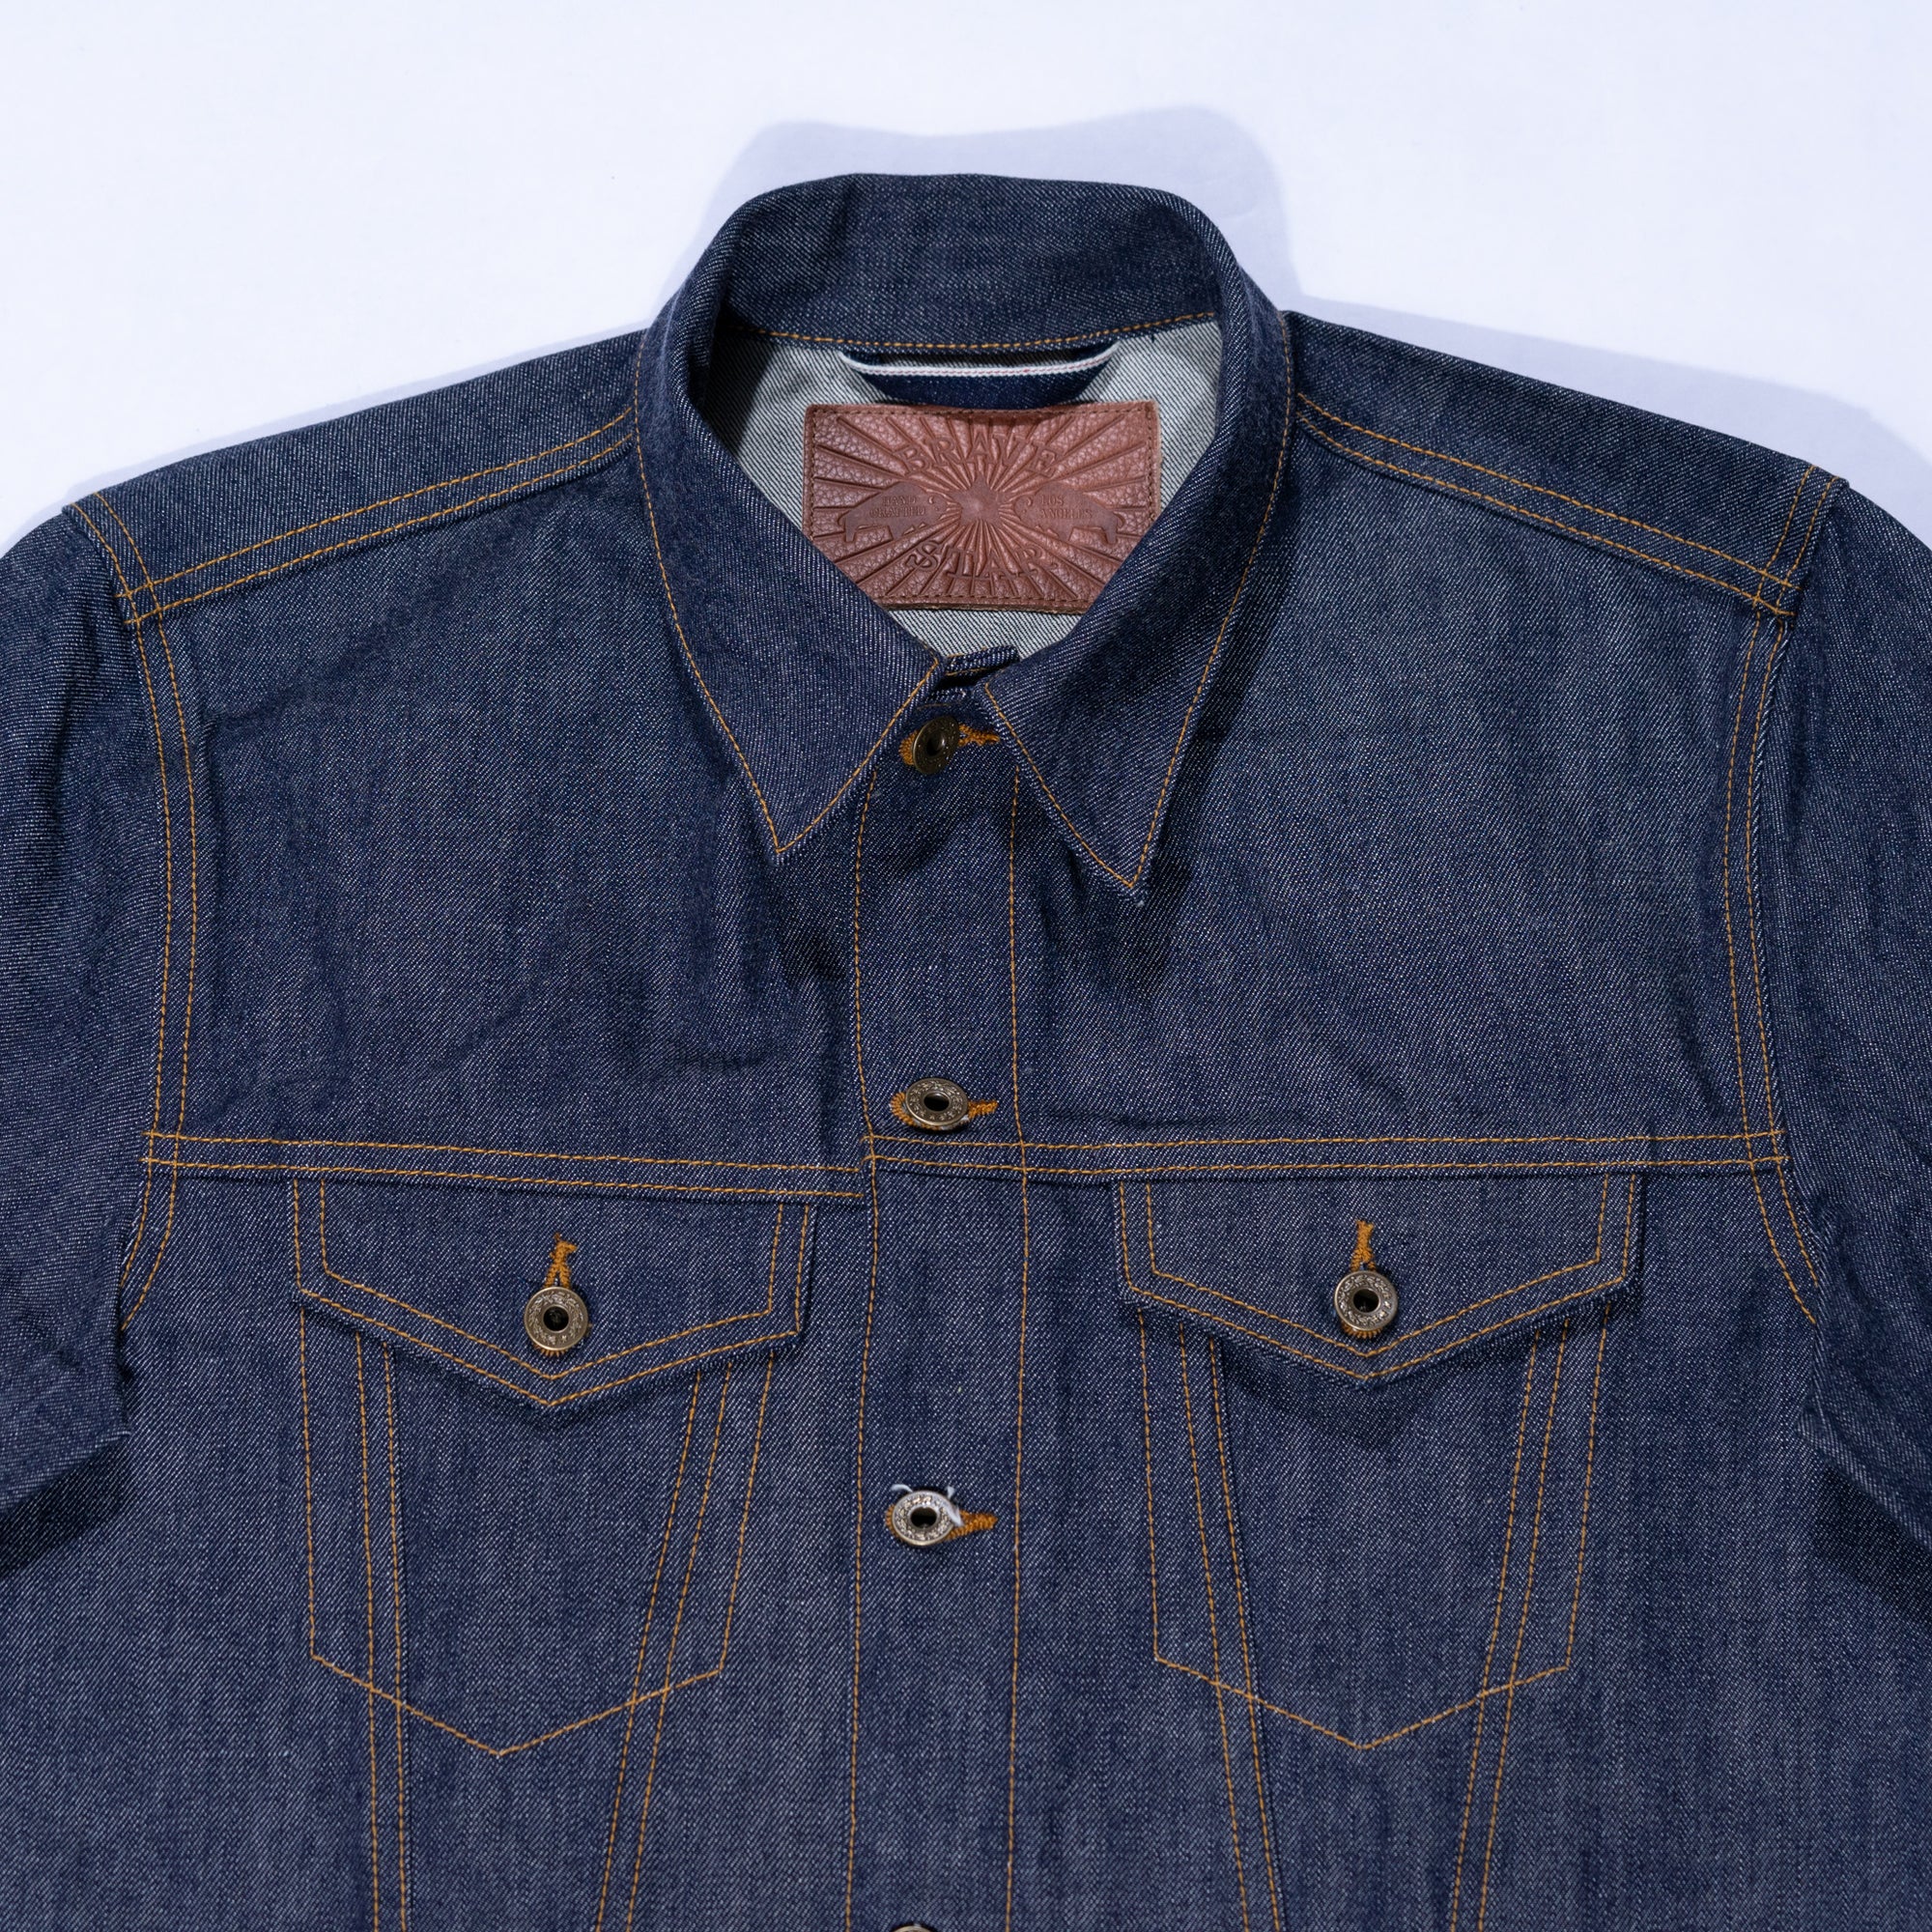 The Ironside Selvedge Denim Jacket from Cone Mills - Brave Star Selvage